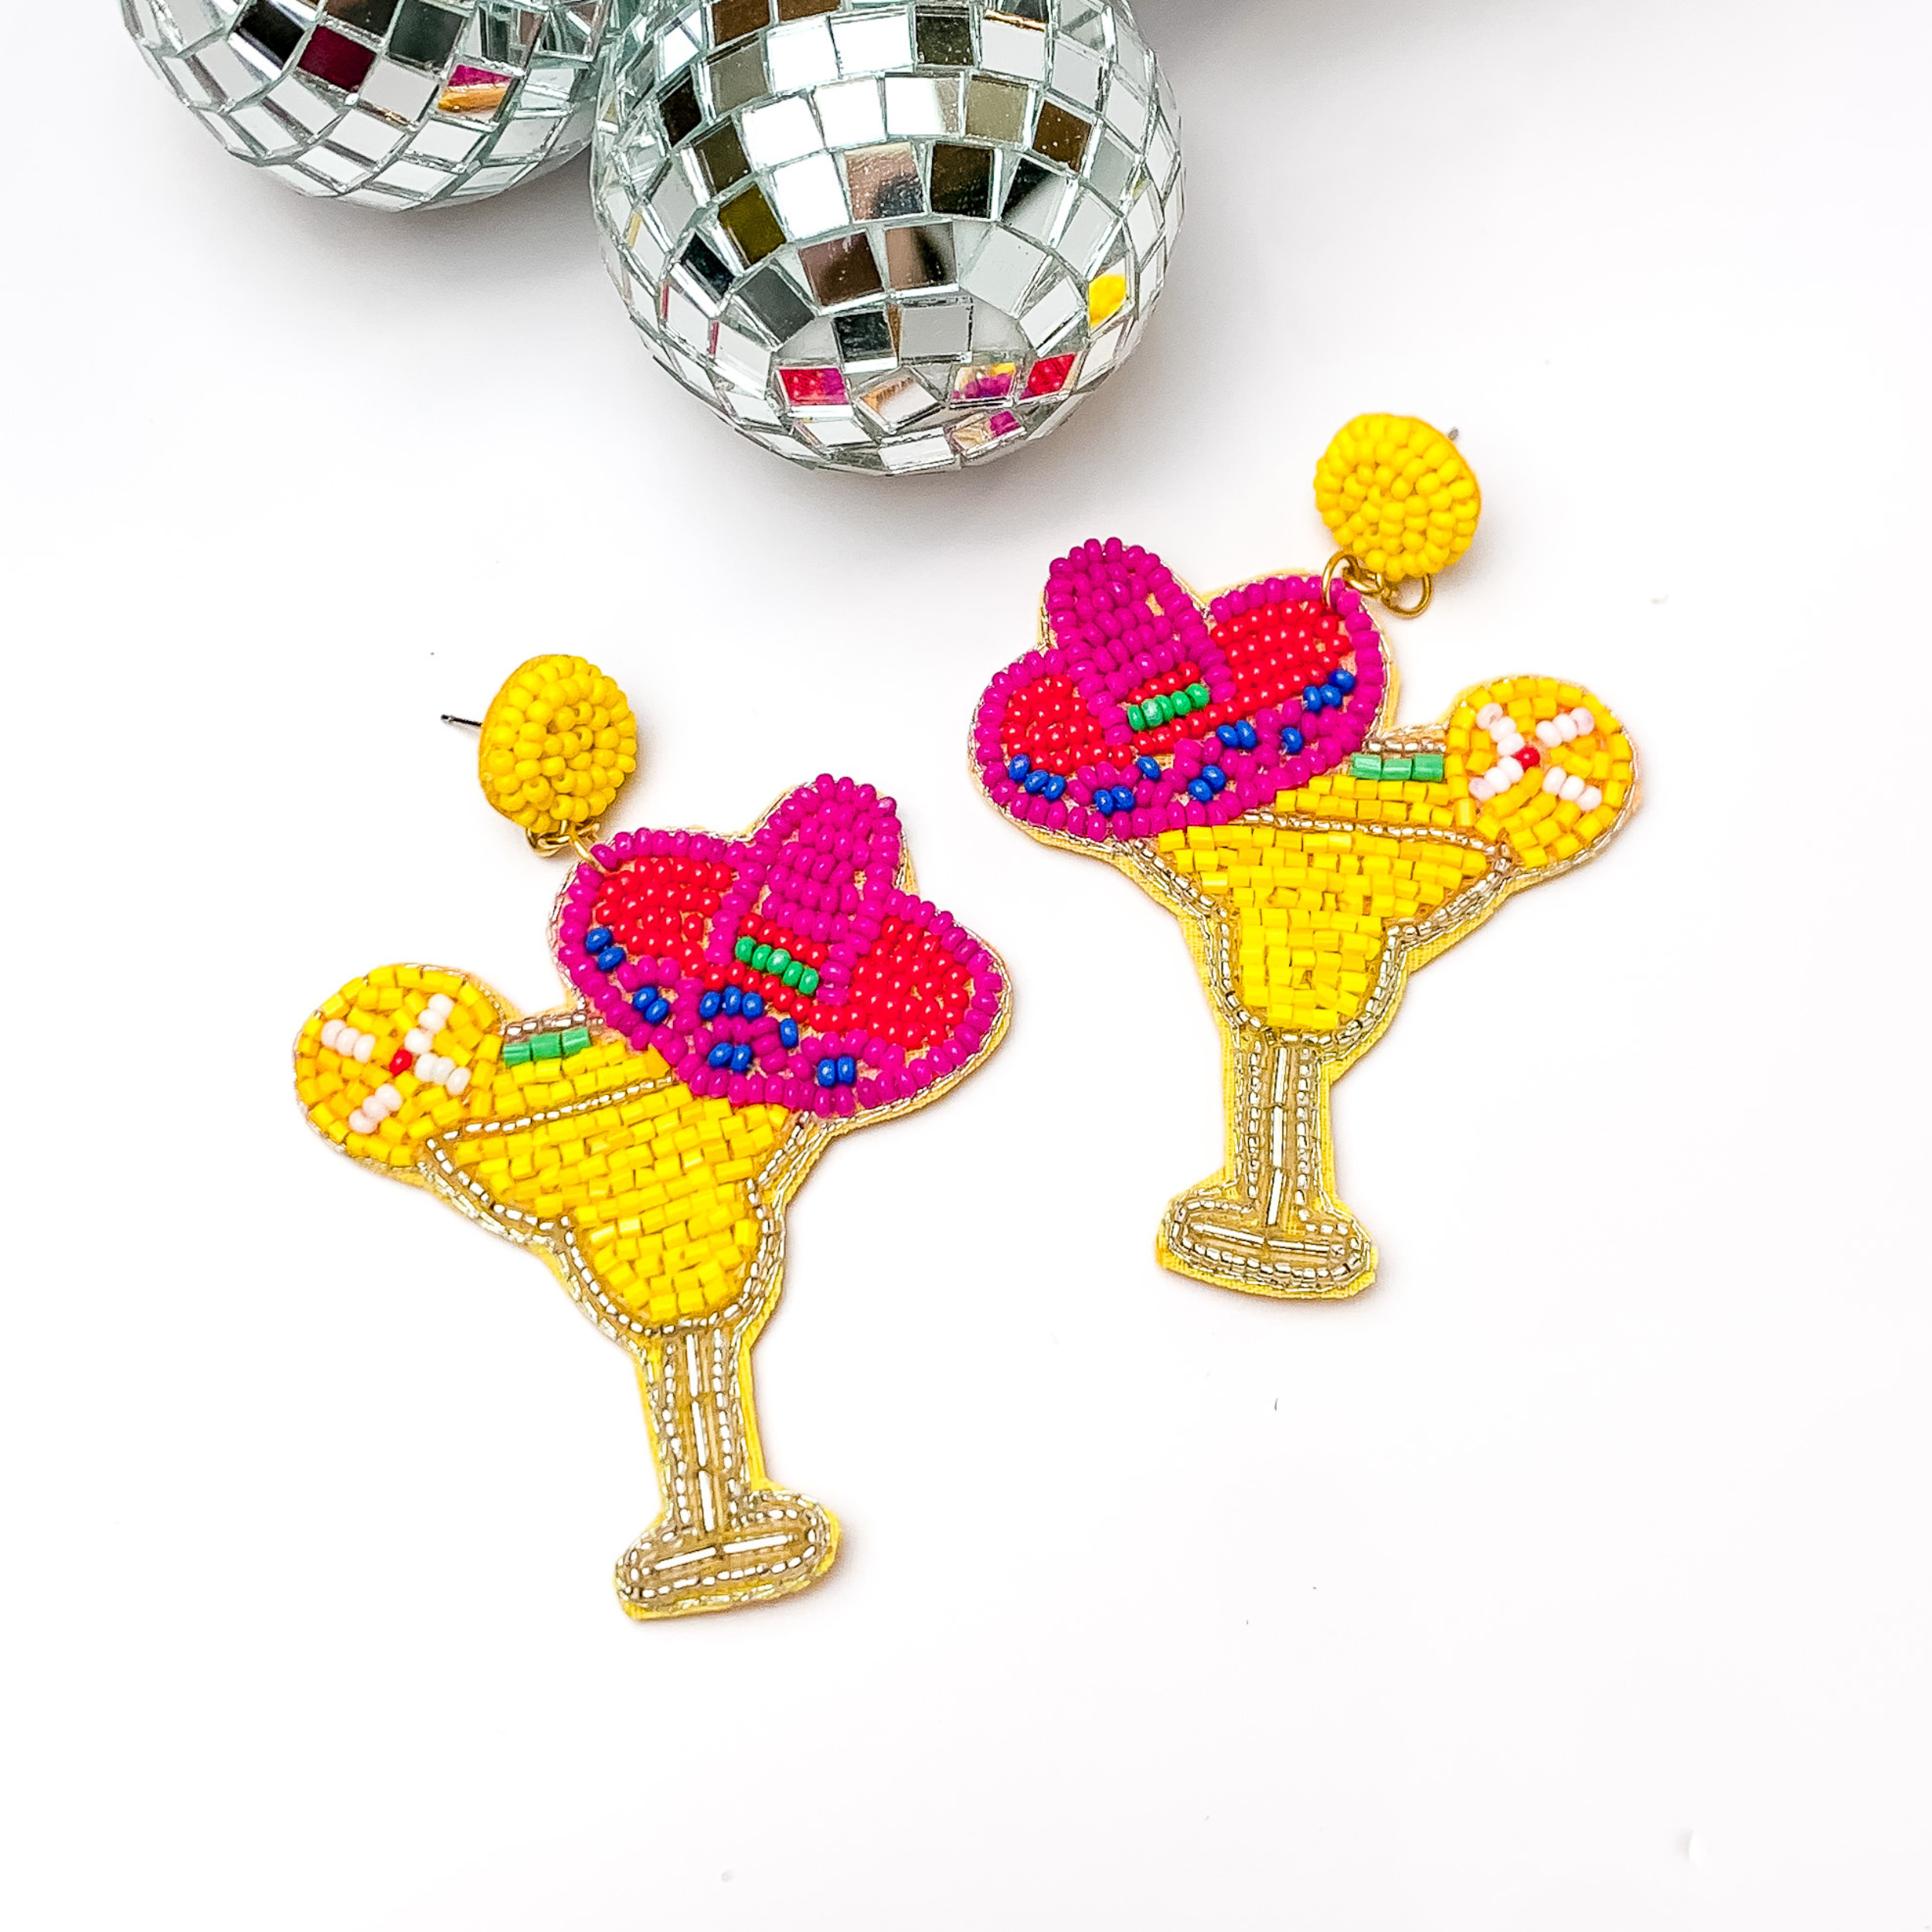 Margarita sombrero seed beaded drop earrings in yellow. The sombrero has orange, dark blue, and pink sequins. Taken in a white background with disco balls in the left corner.